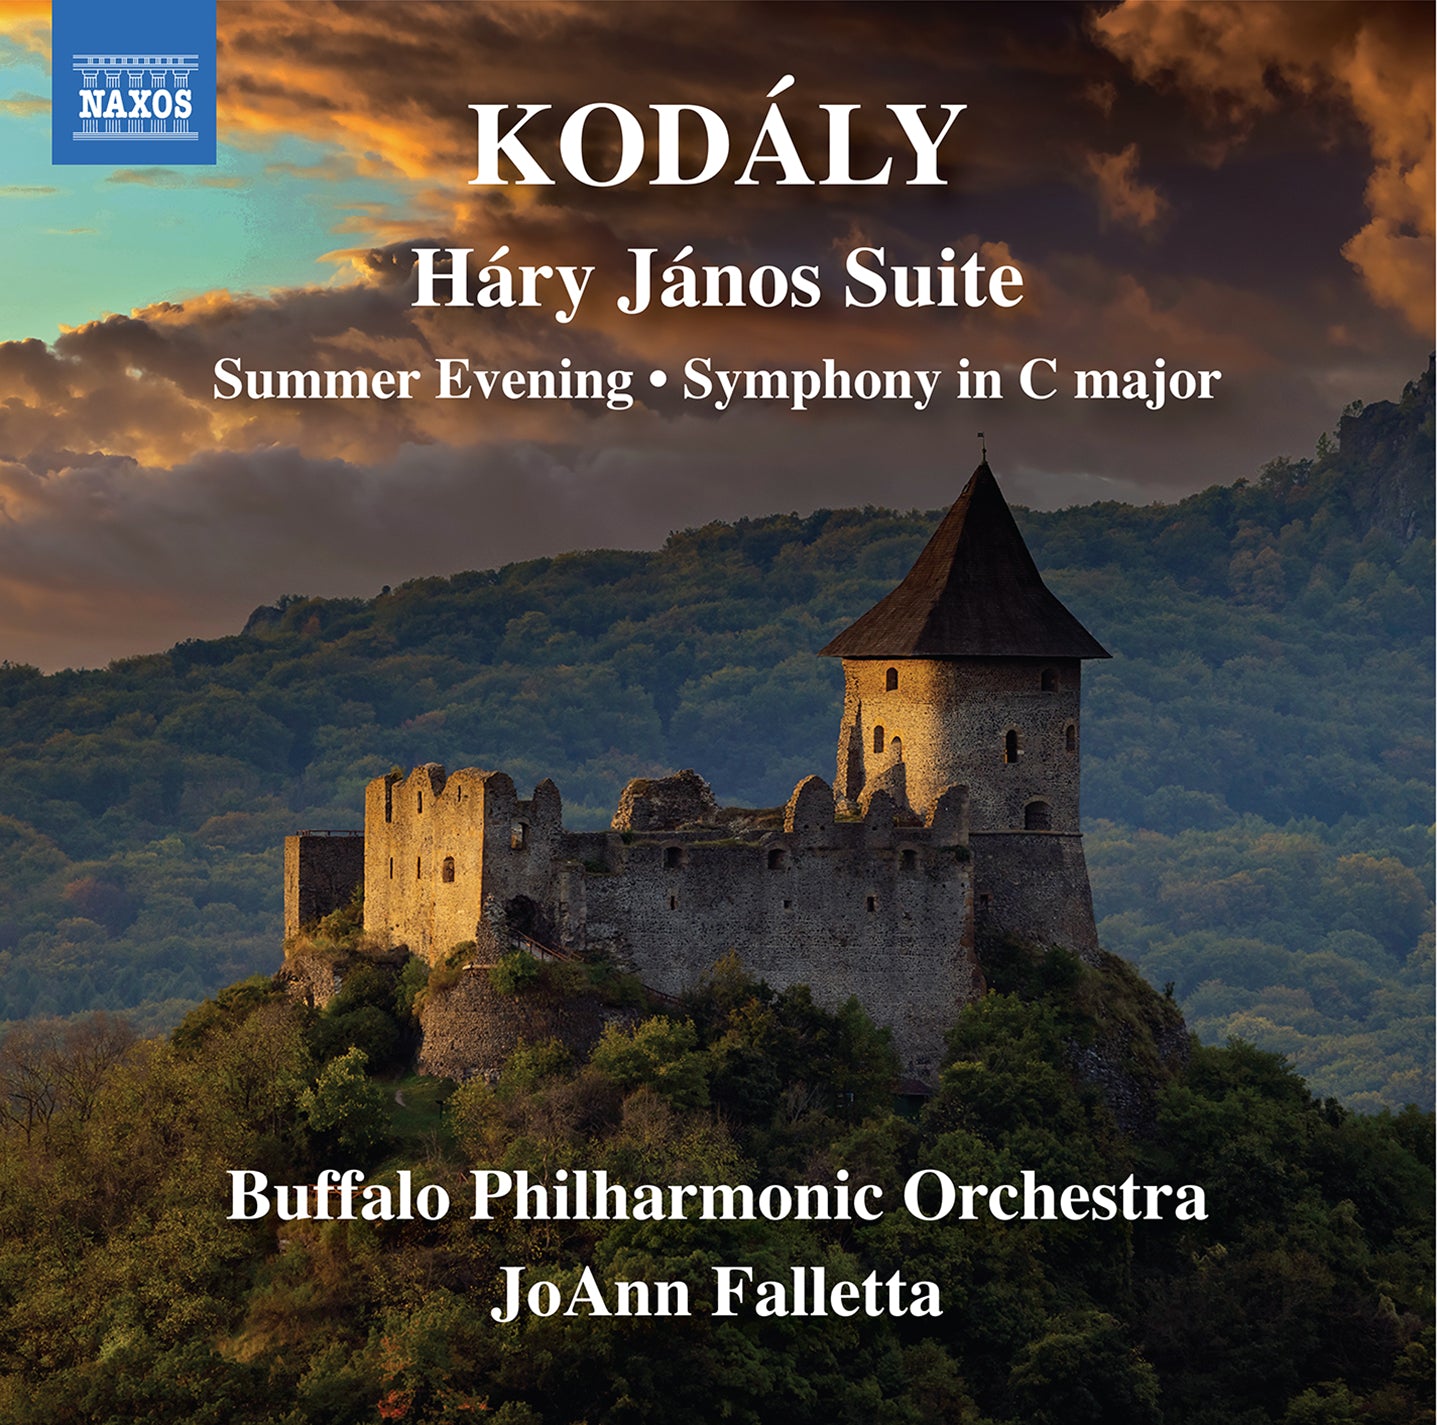 Kodaly: Symphony in C; Summer Evening; Hary Janos Suite